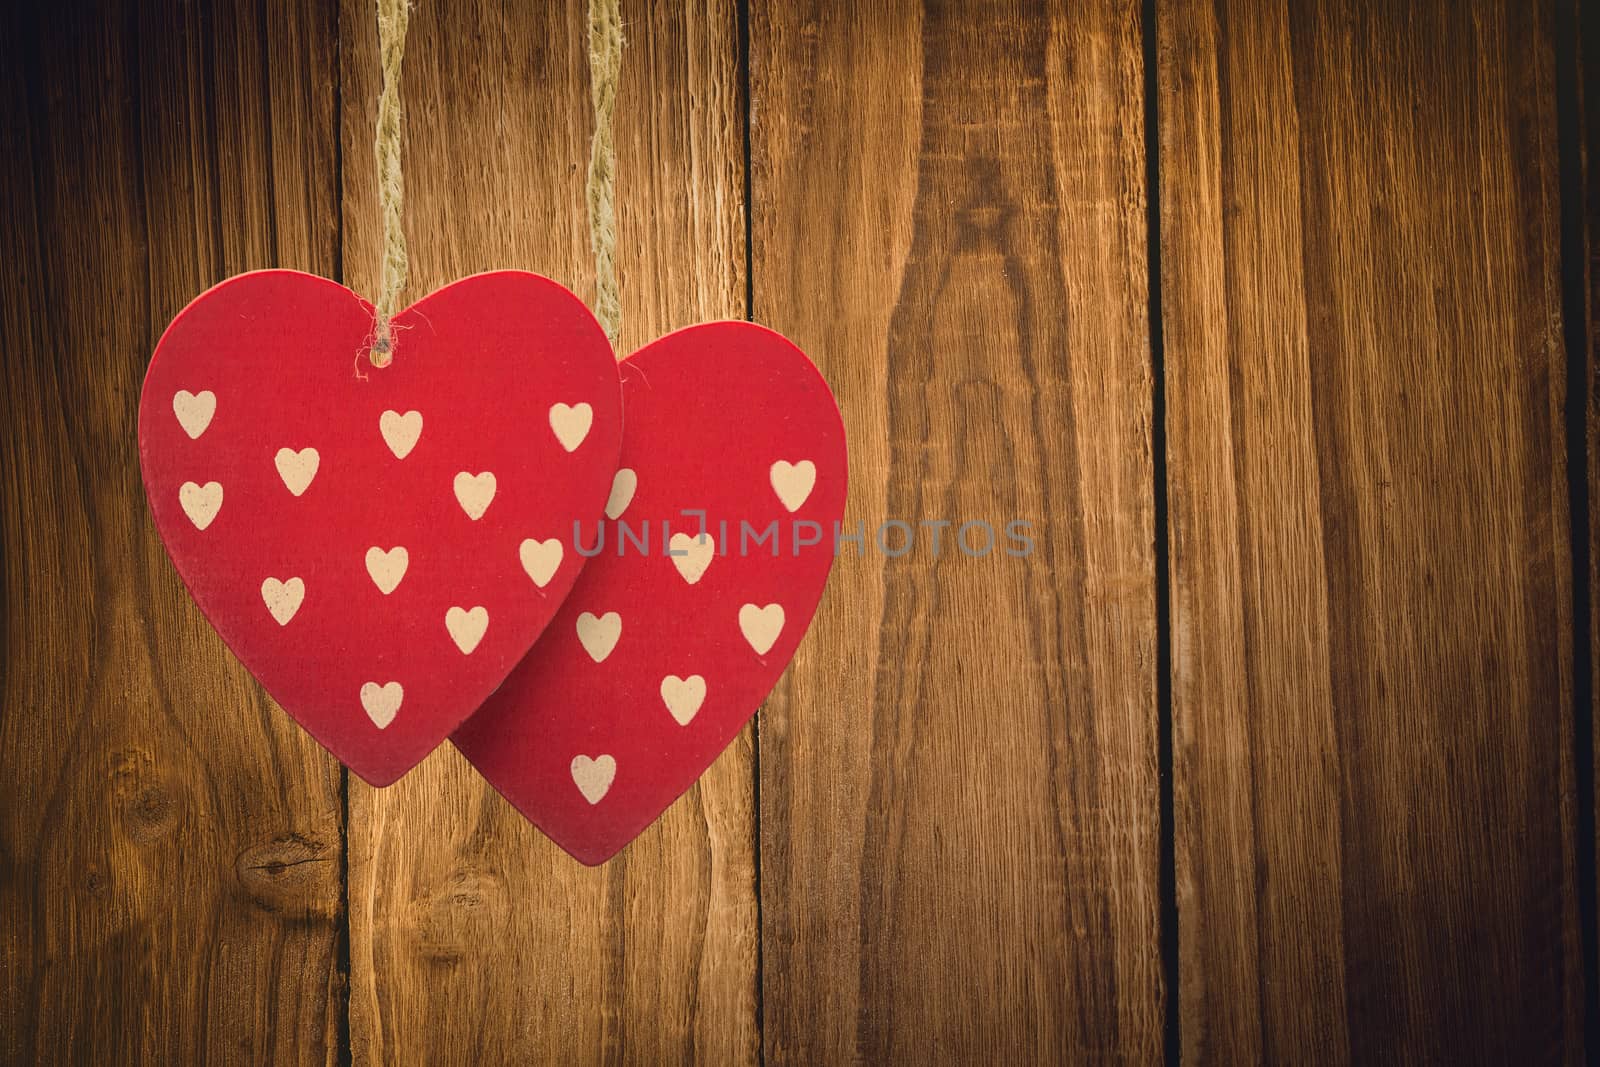 Cute heart decorations against wooden table